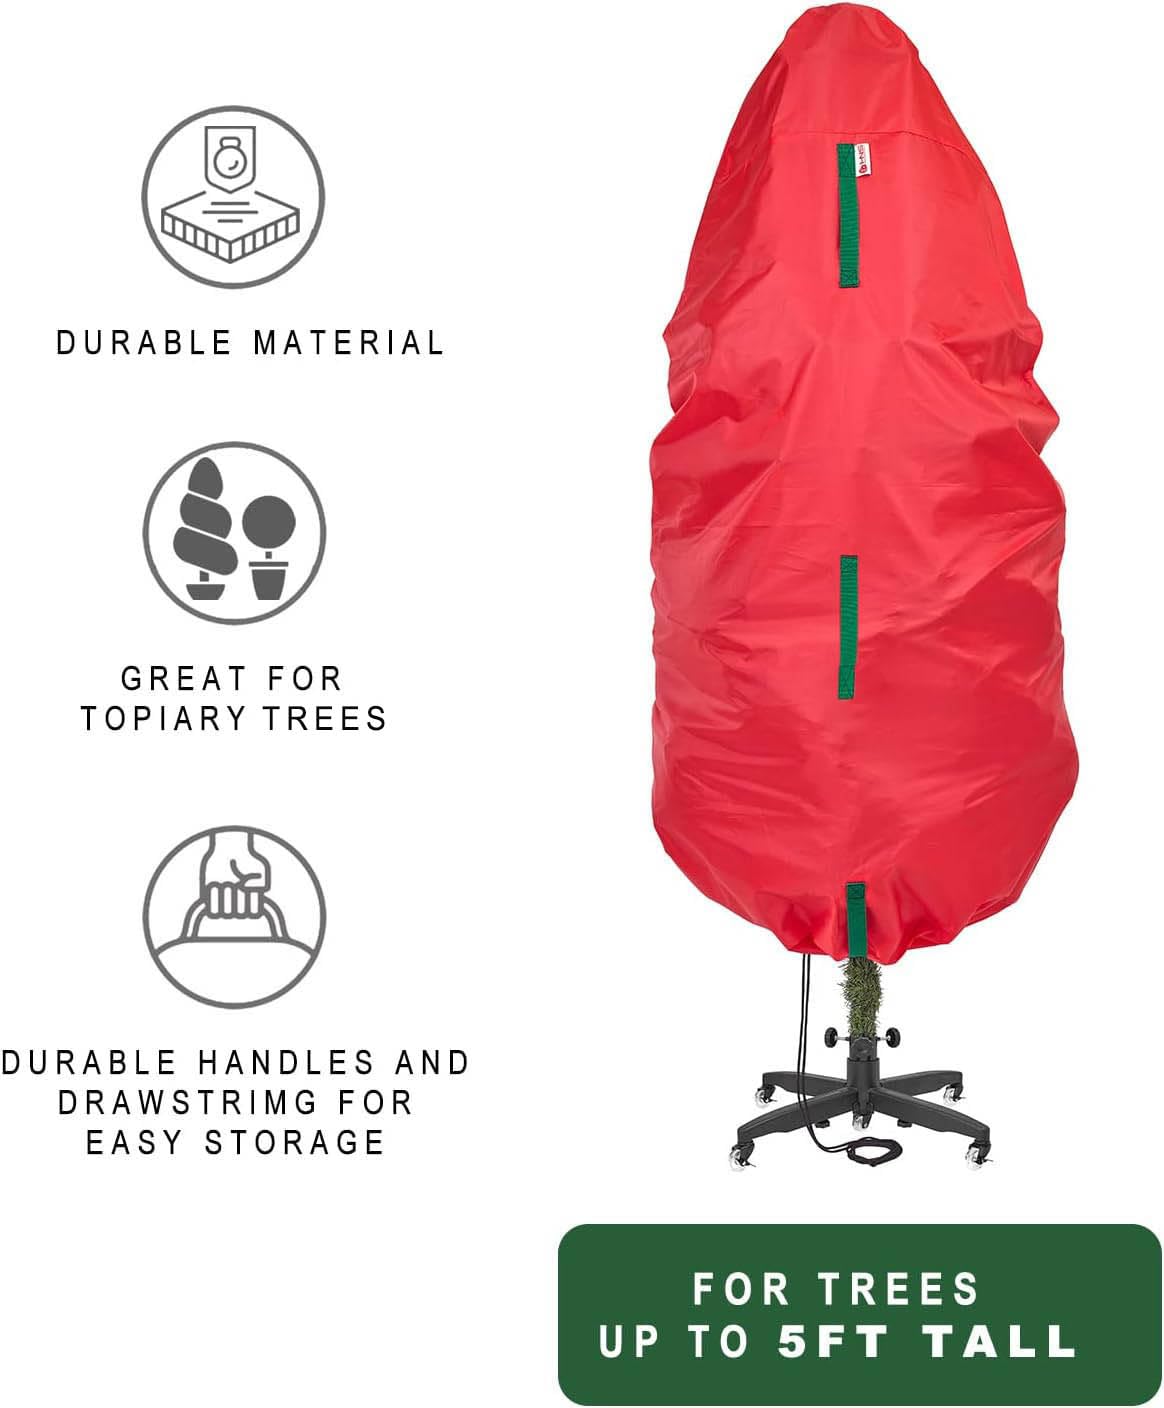 Upright Christmas Tree Storage Bag - Holiday Tree Cover for Christmas Trees or Topiary Trees - Durable, Lightweight, Convenient, Vertical Xmas Storage Bag  - Like New